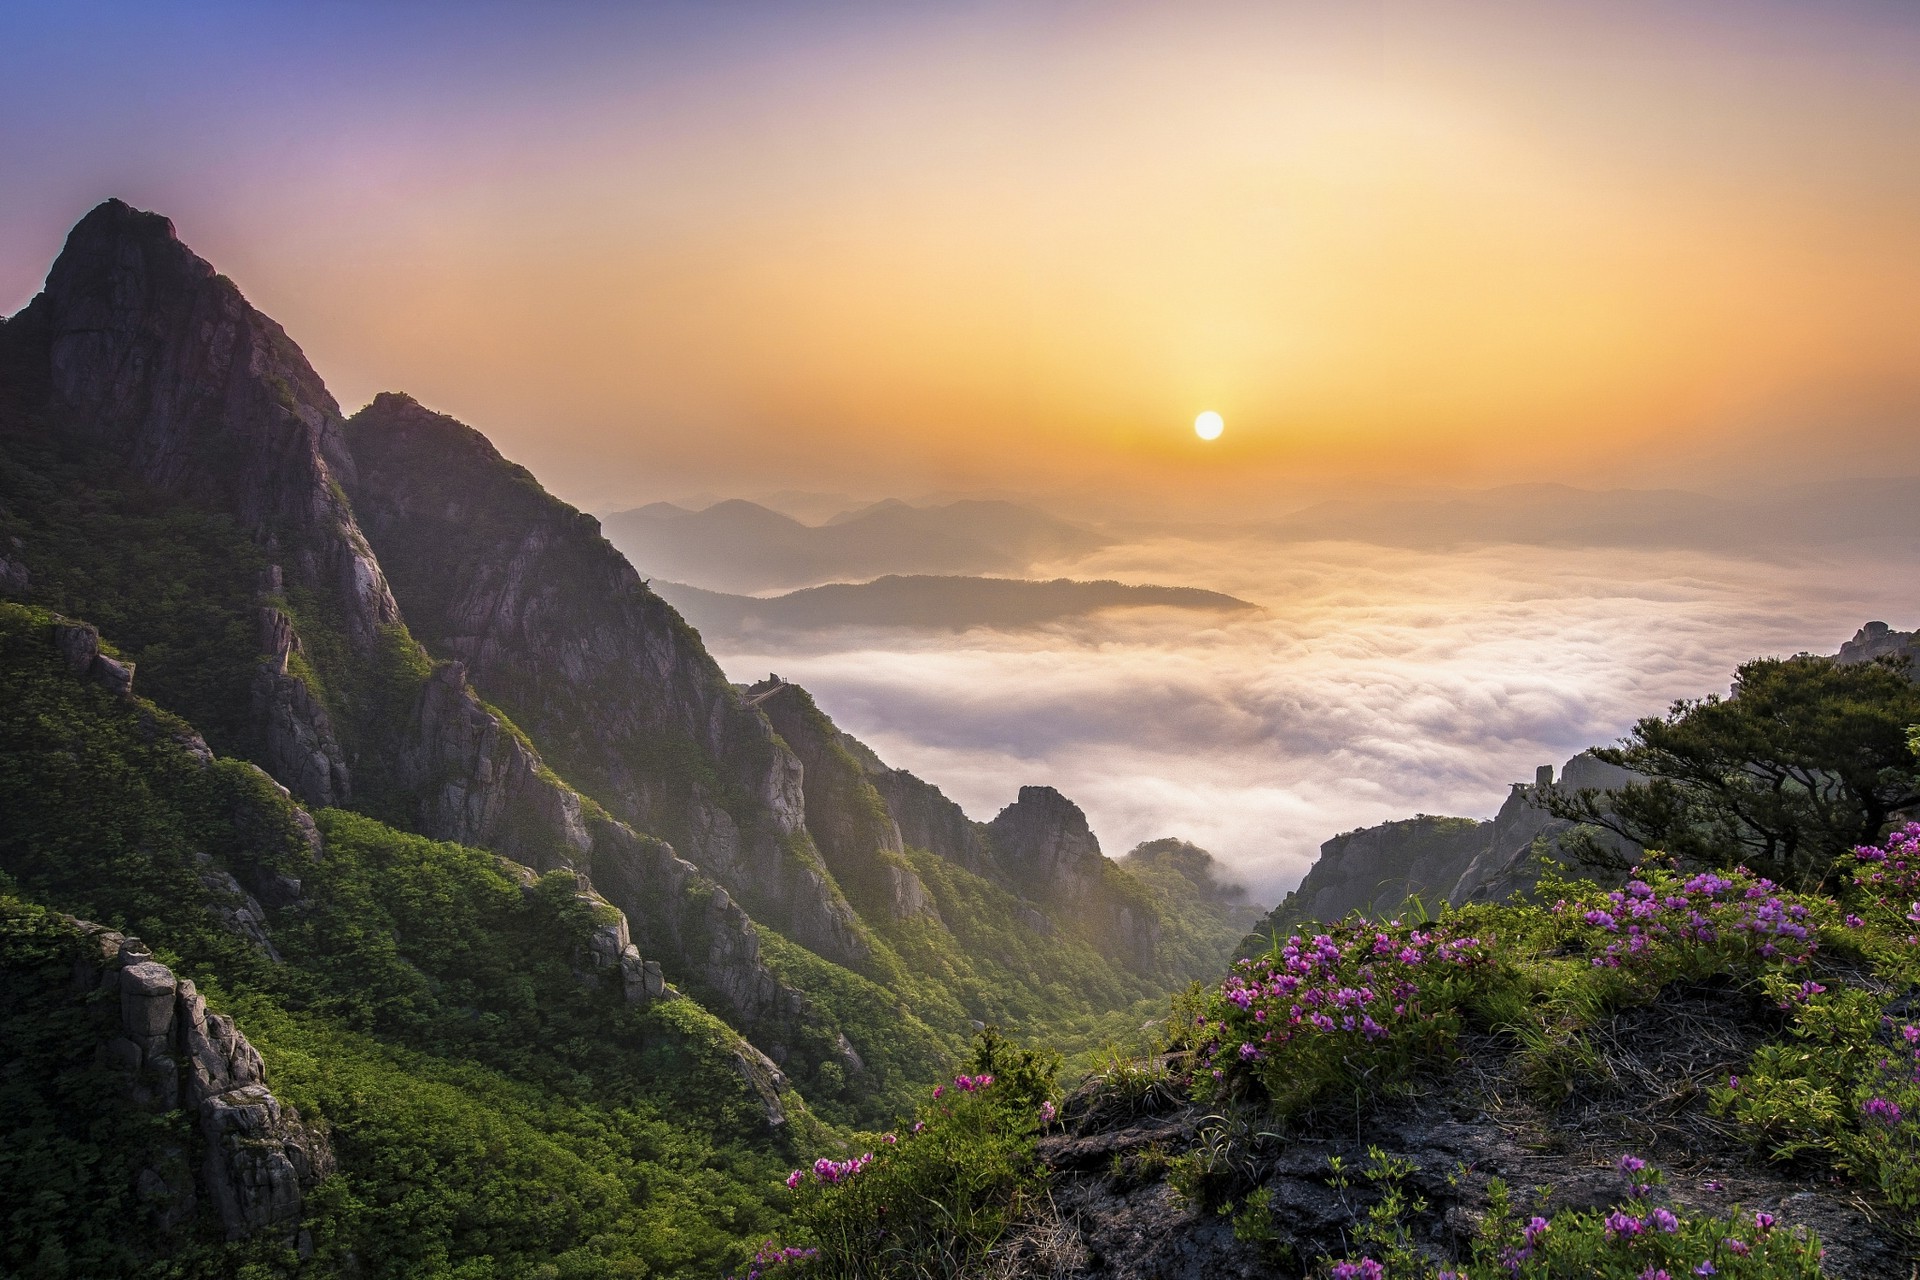 sunrise, Morning, Mountain, Clouds, Nature, Landscape, South Korea, Wildflowers, Valley, Mist, Shrubs, Trees, Clear Sky, Forest Wallpaper